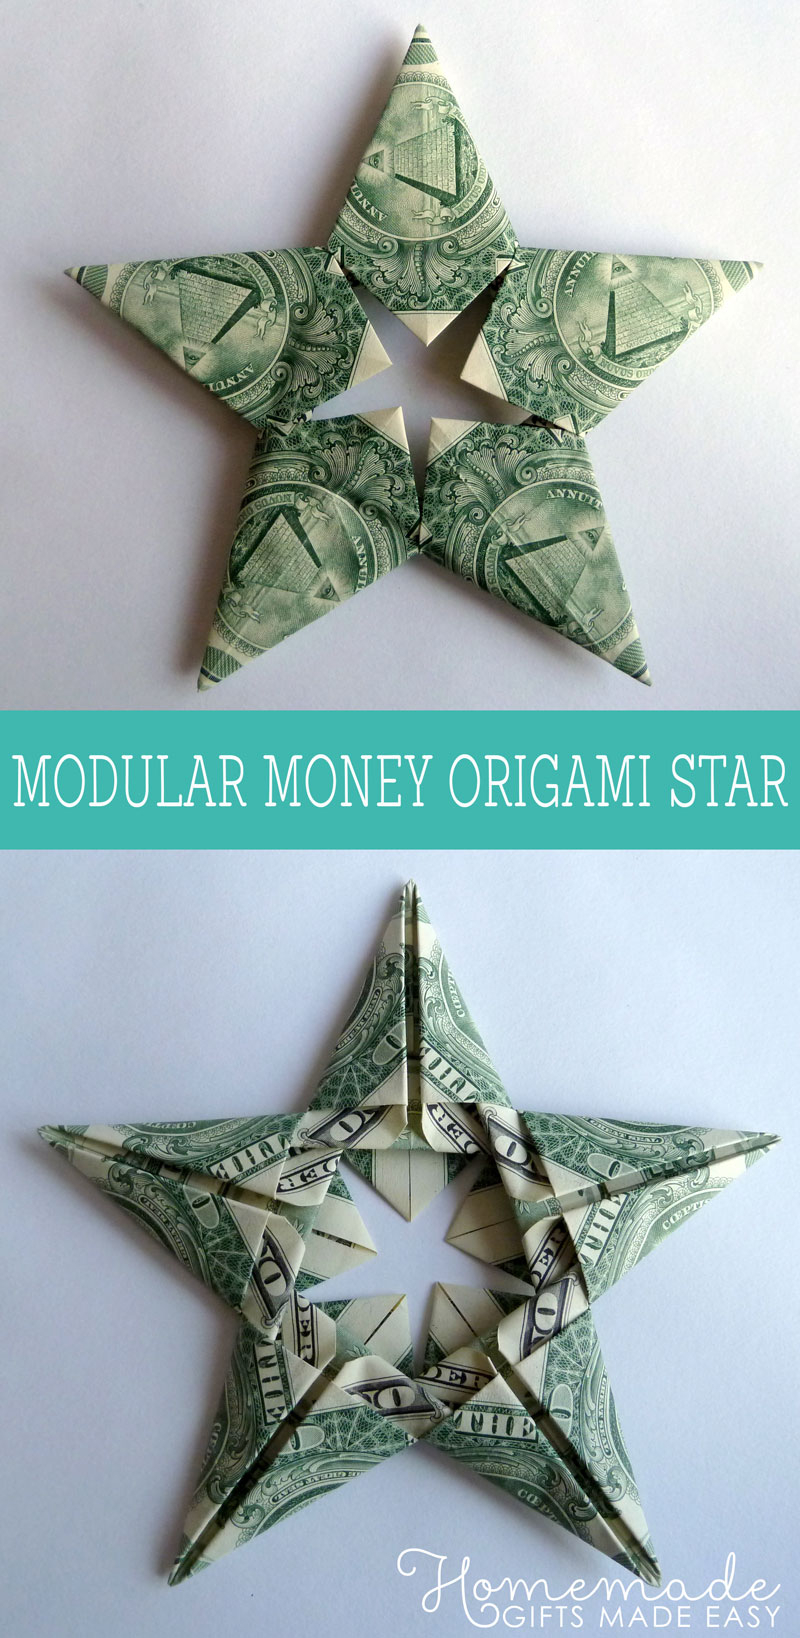 How To Make An Origami Star Of David Modular Money Origami Star From 5 Bills How To Fold Step Step